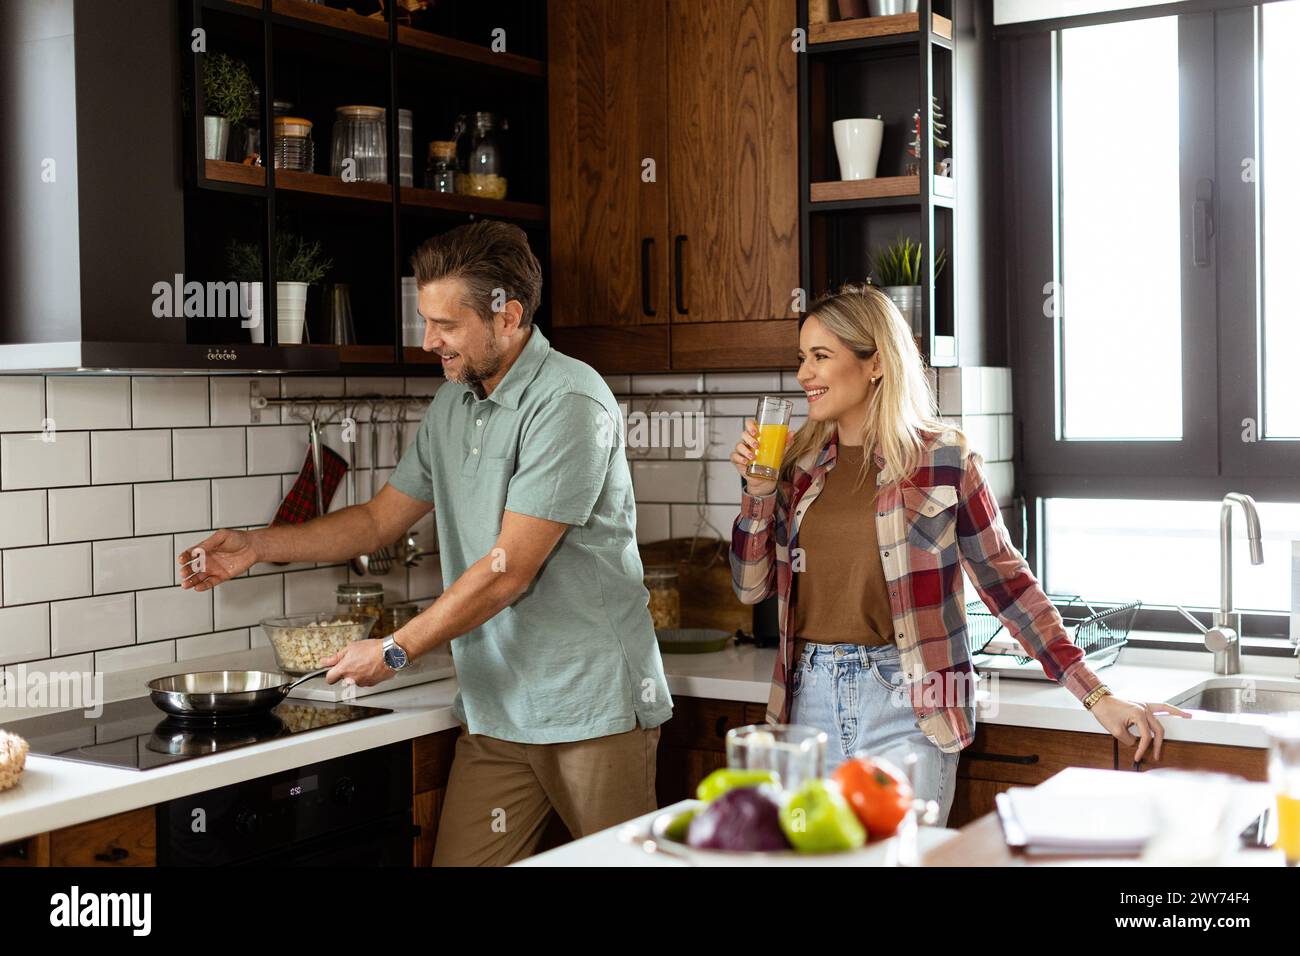 A man and woman sharing a laugh as they cook in a cozy, well-organized kitchen Stock Photo